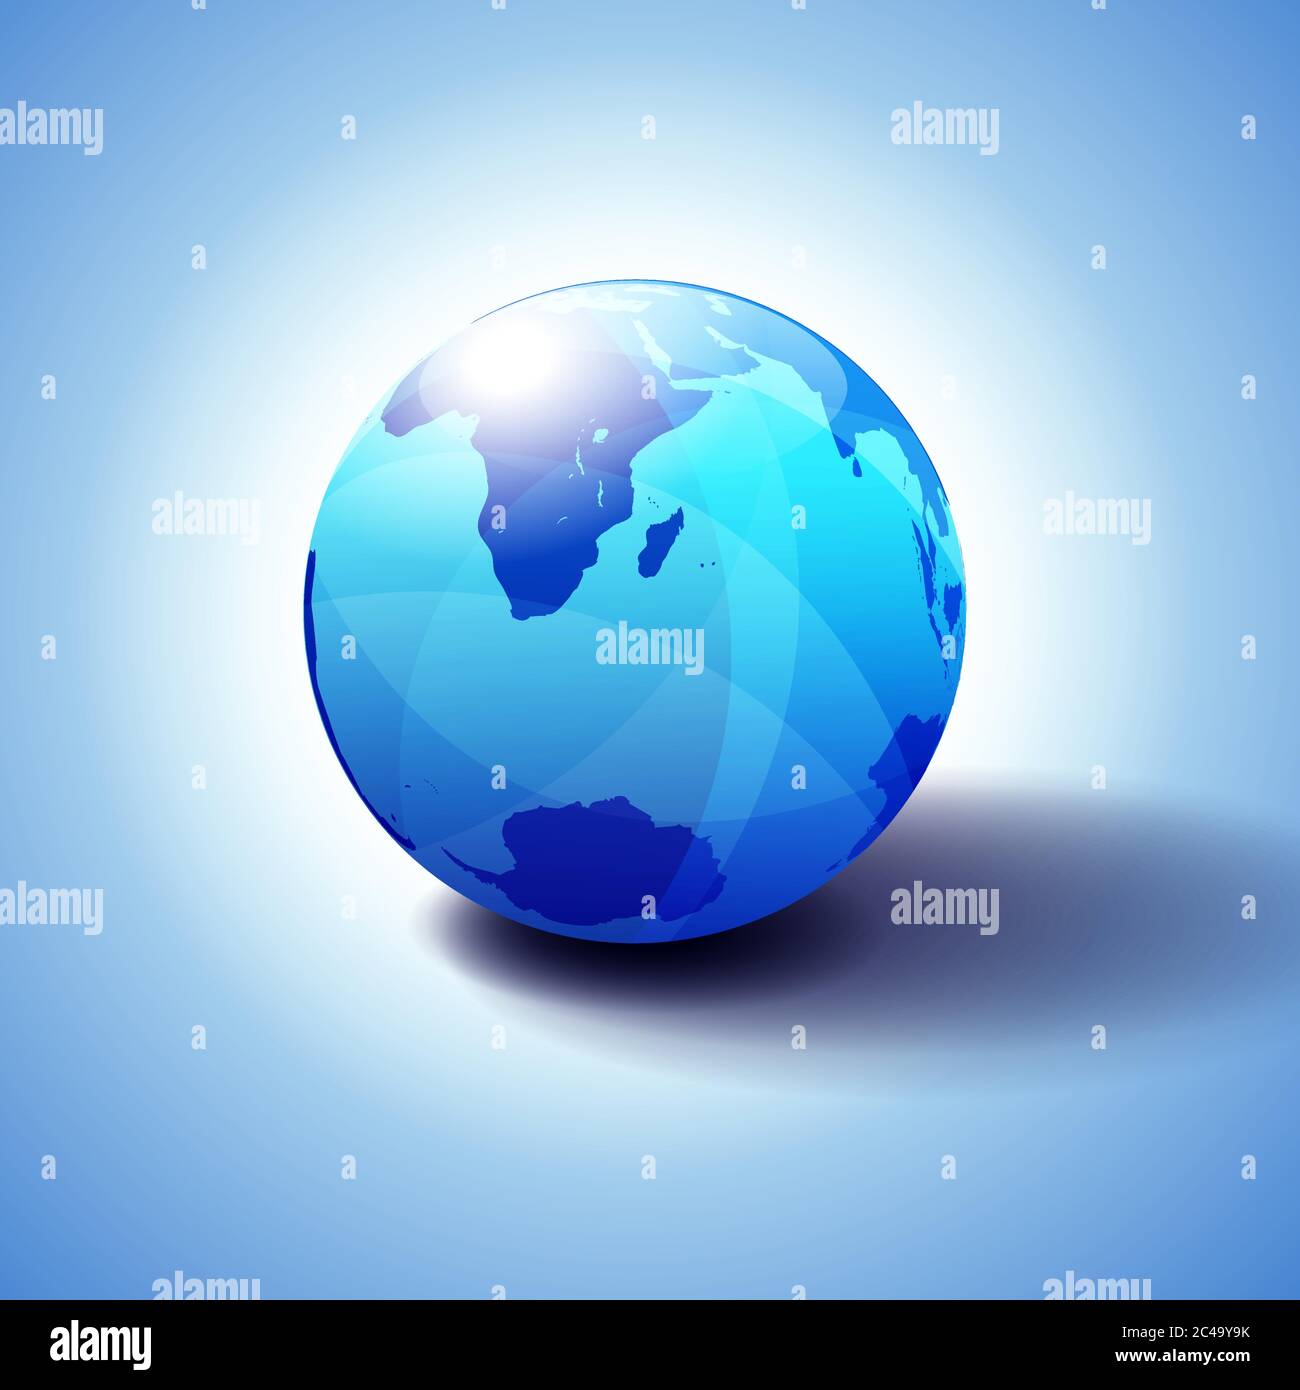 South Africa, Madagascar, and the South Pole, Globe Icon 3D illustration, Glossy, Shiny Sphere with Global Map in Subtle Blues giving a transparent fe Stock Vector